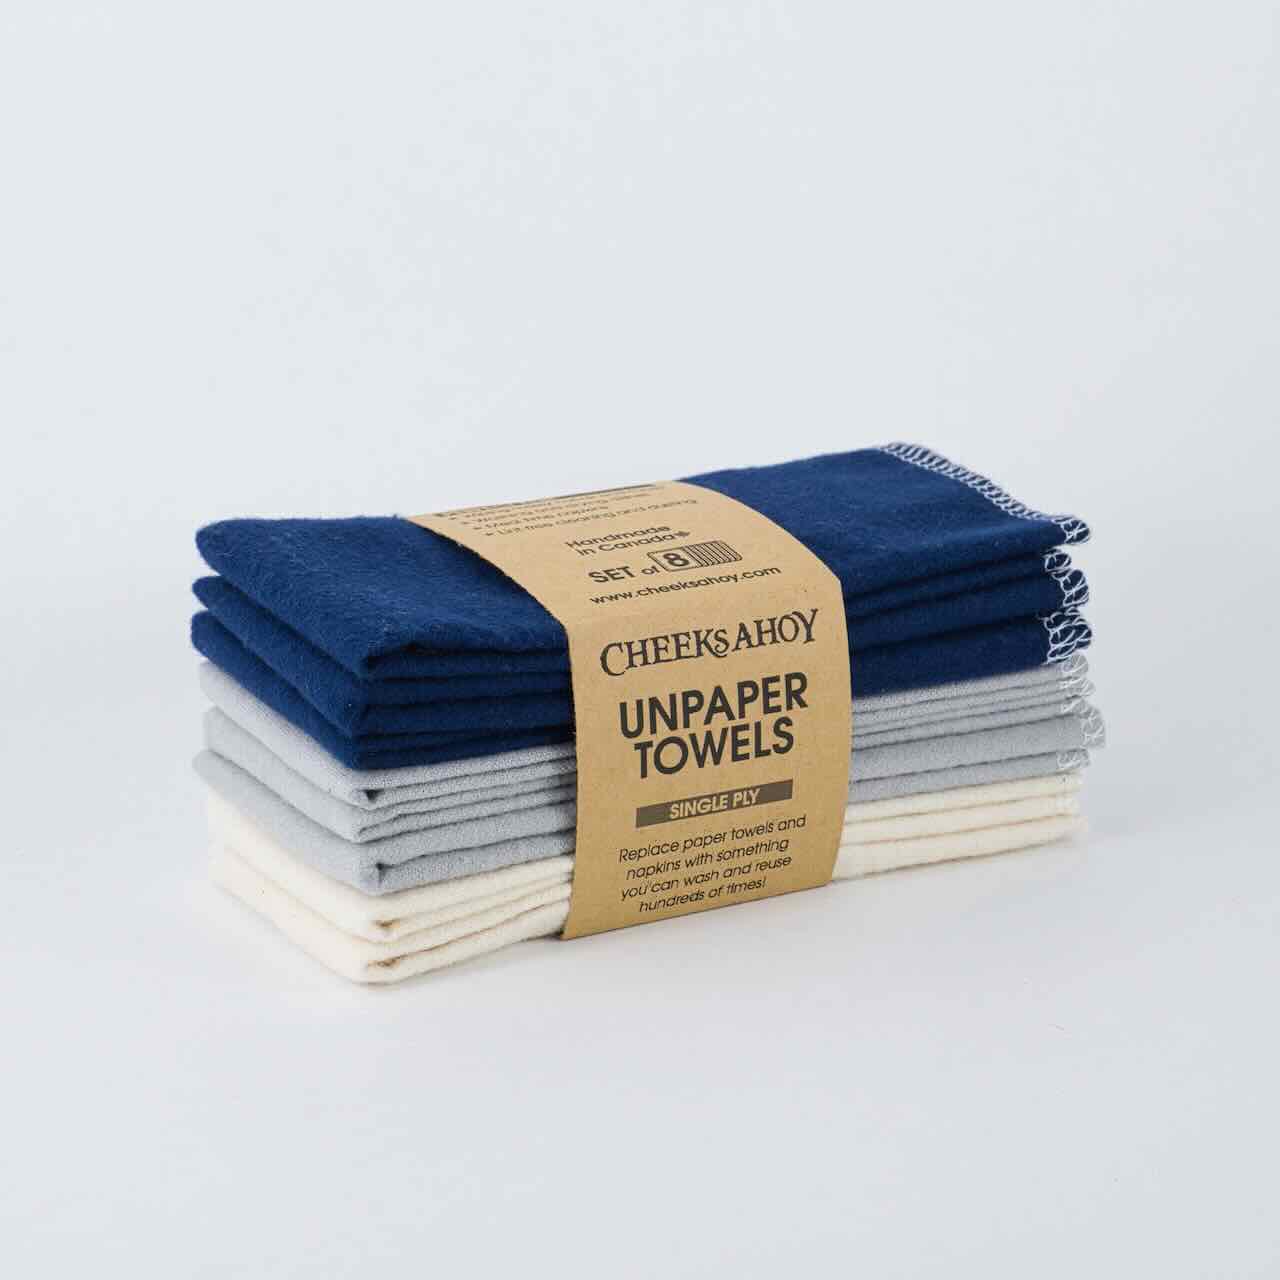 cheeks ahoy warm navy unpaper towels set of 8 on top of a plain table top.